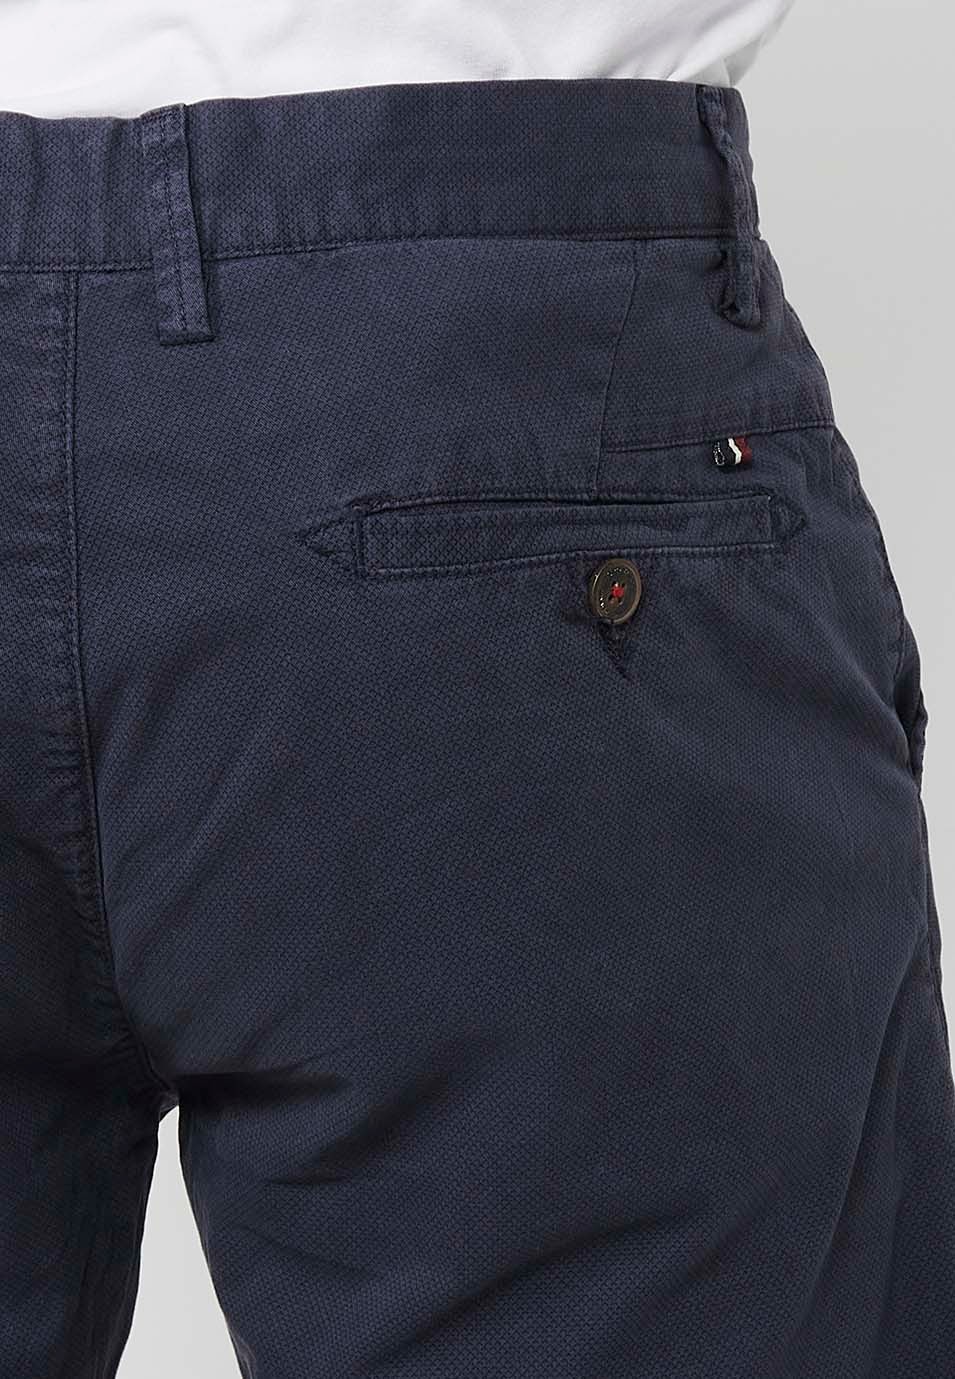 Bermuda Chino shorts with turn-up finish with front zipper and button closure with four pockets in Navy Color for Men 6